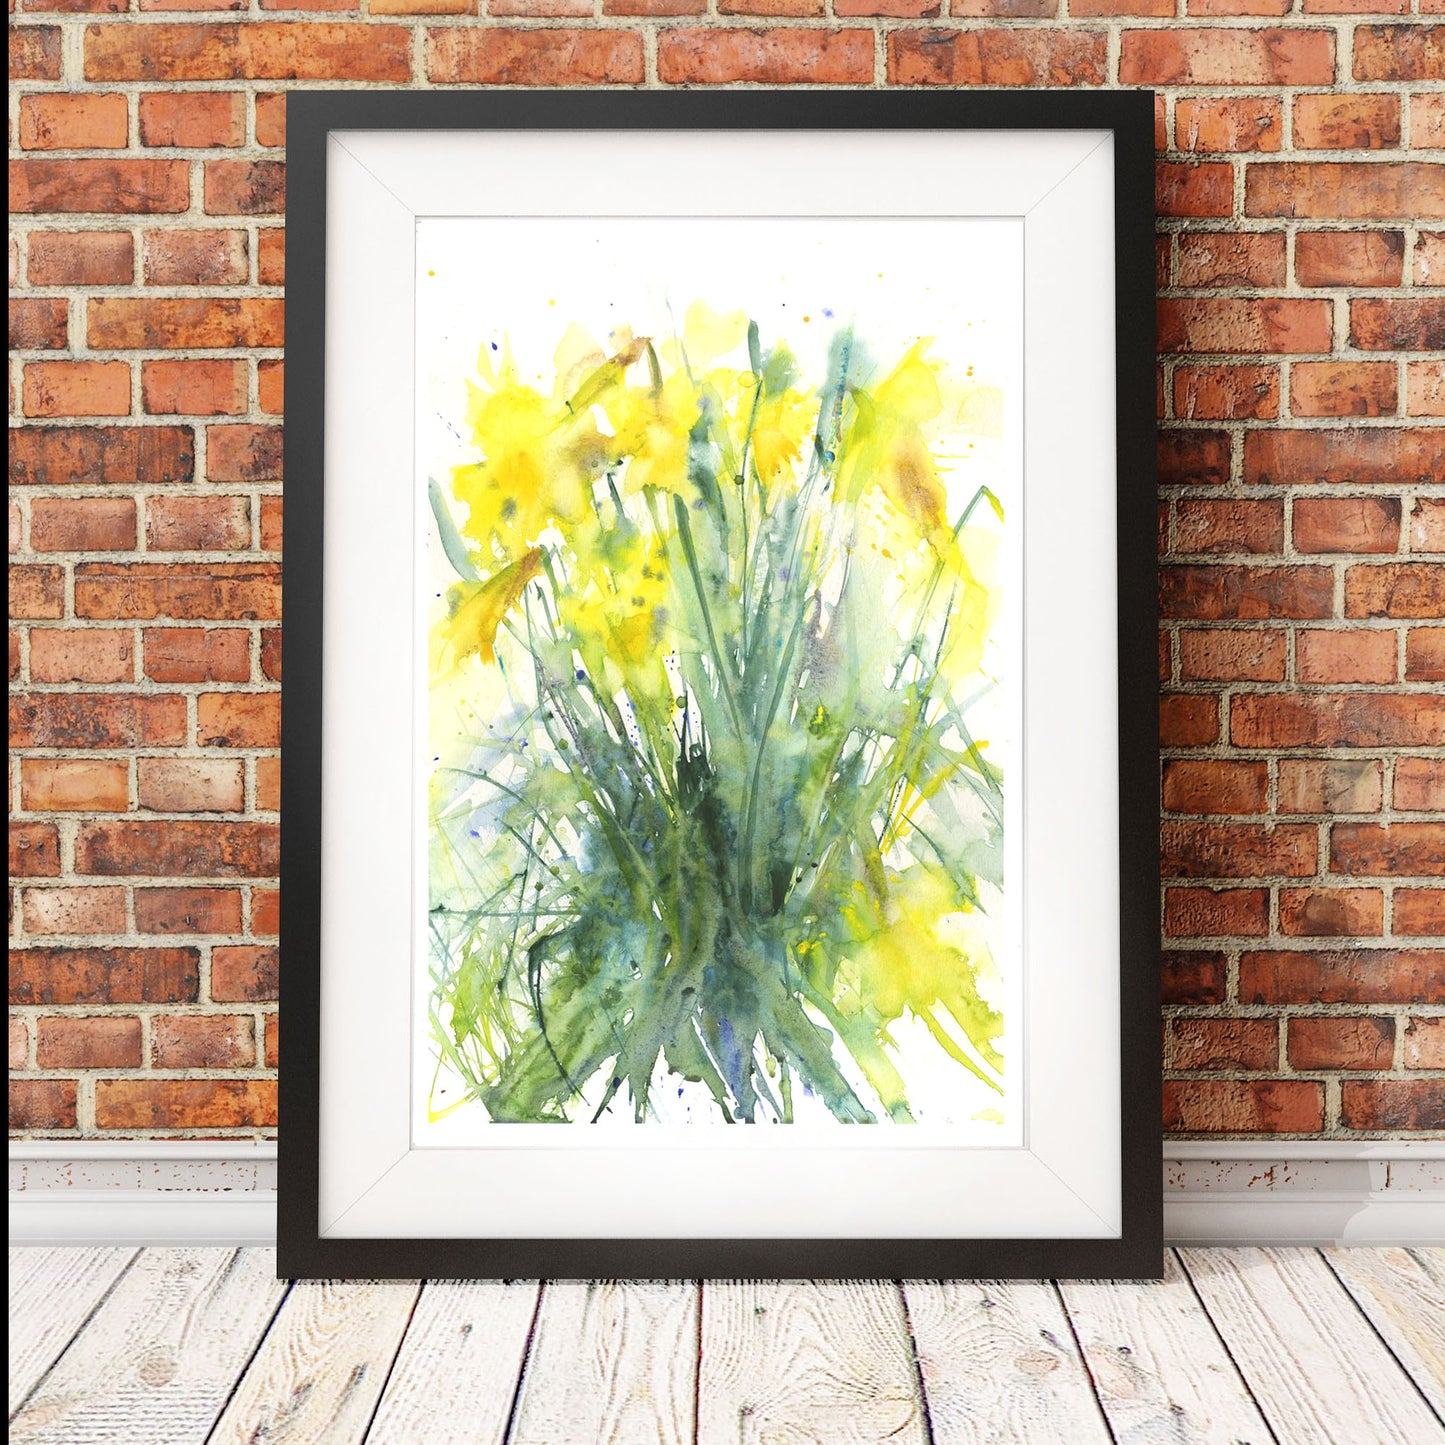 watercolour painting "Daffodils" by Jen Buckley